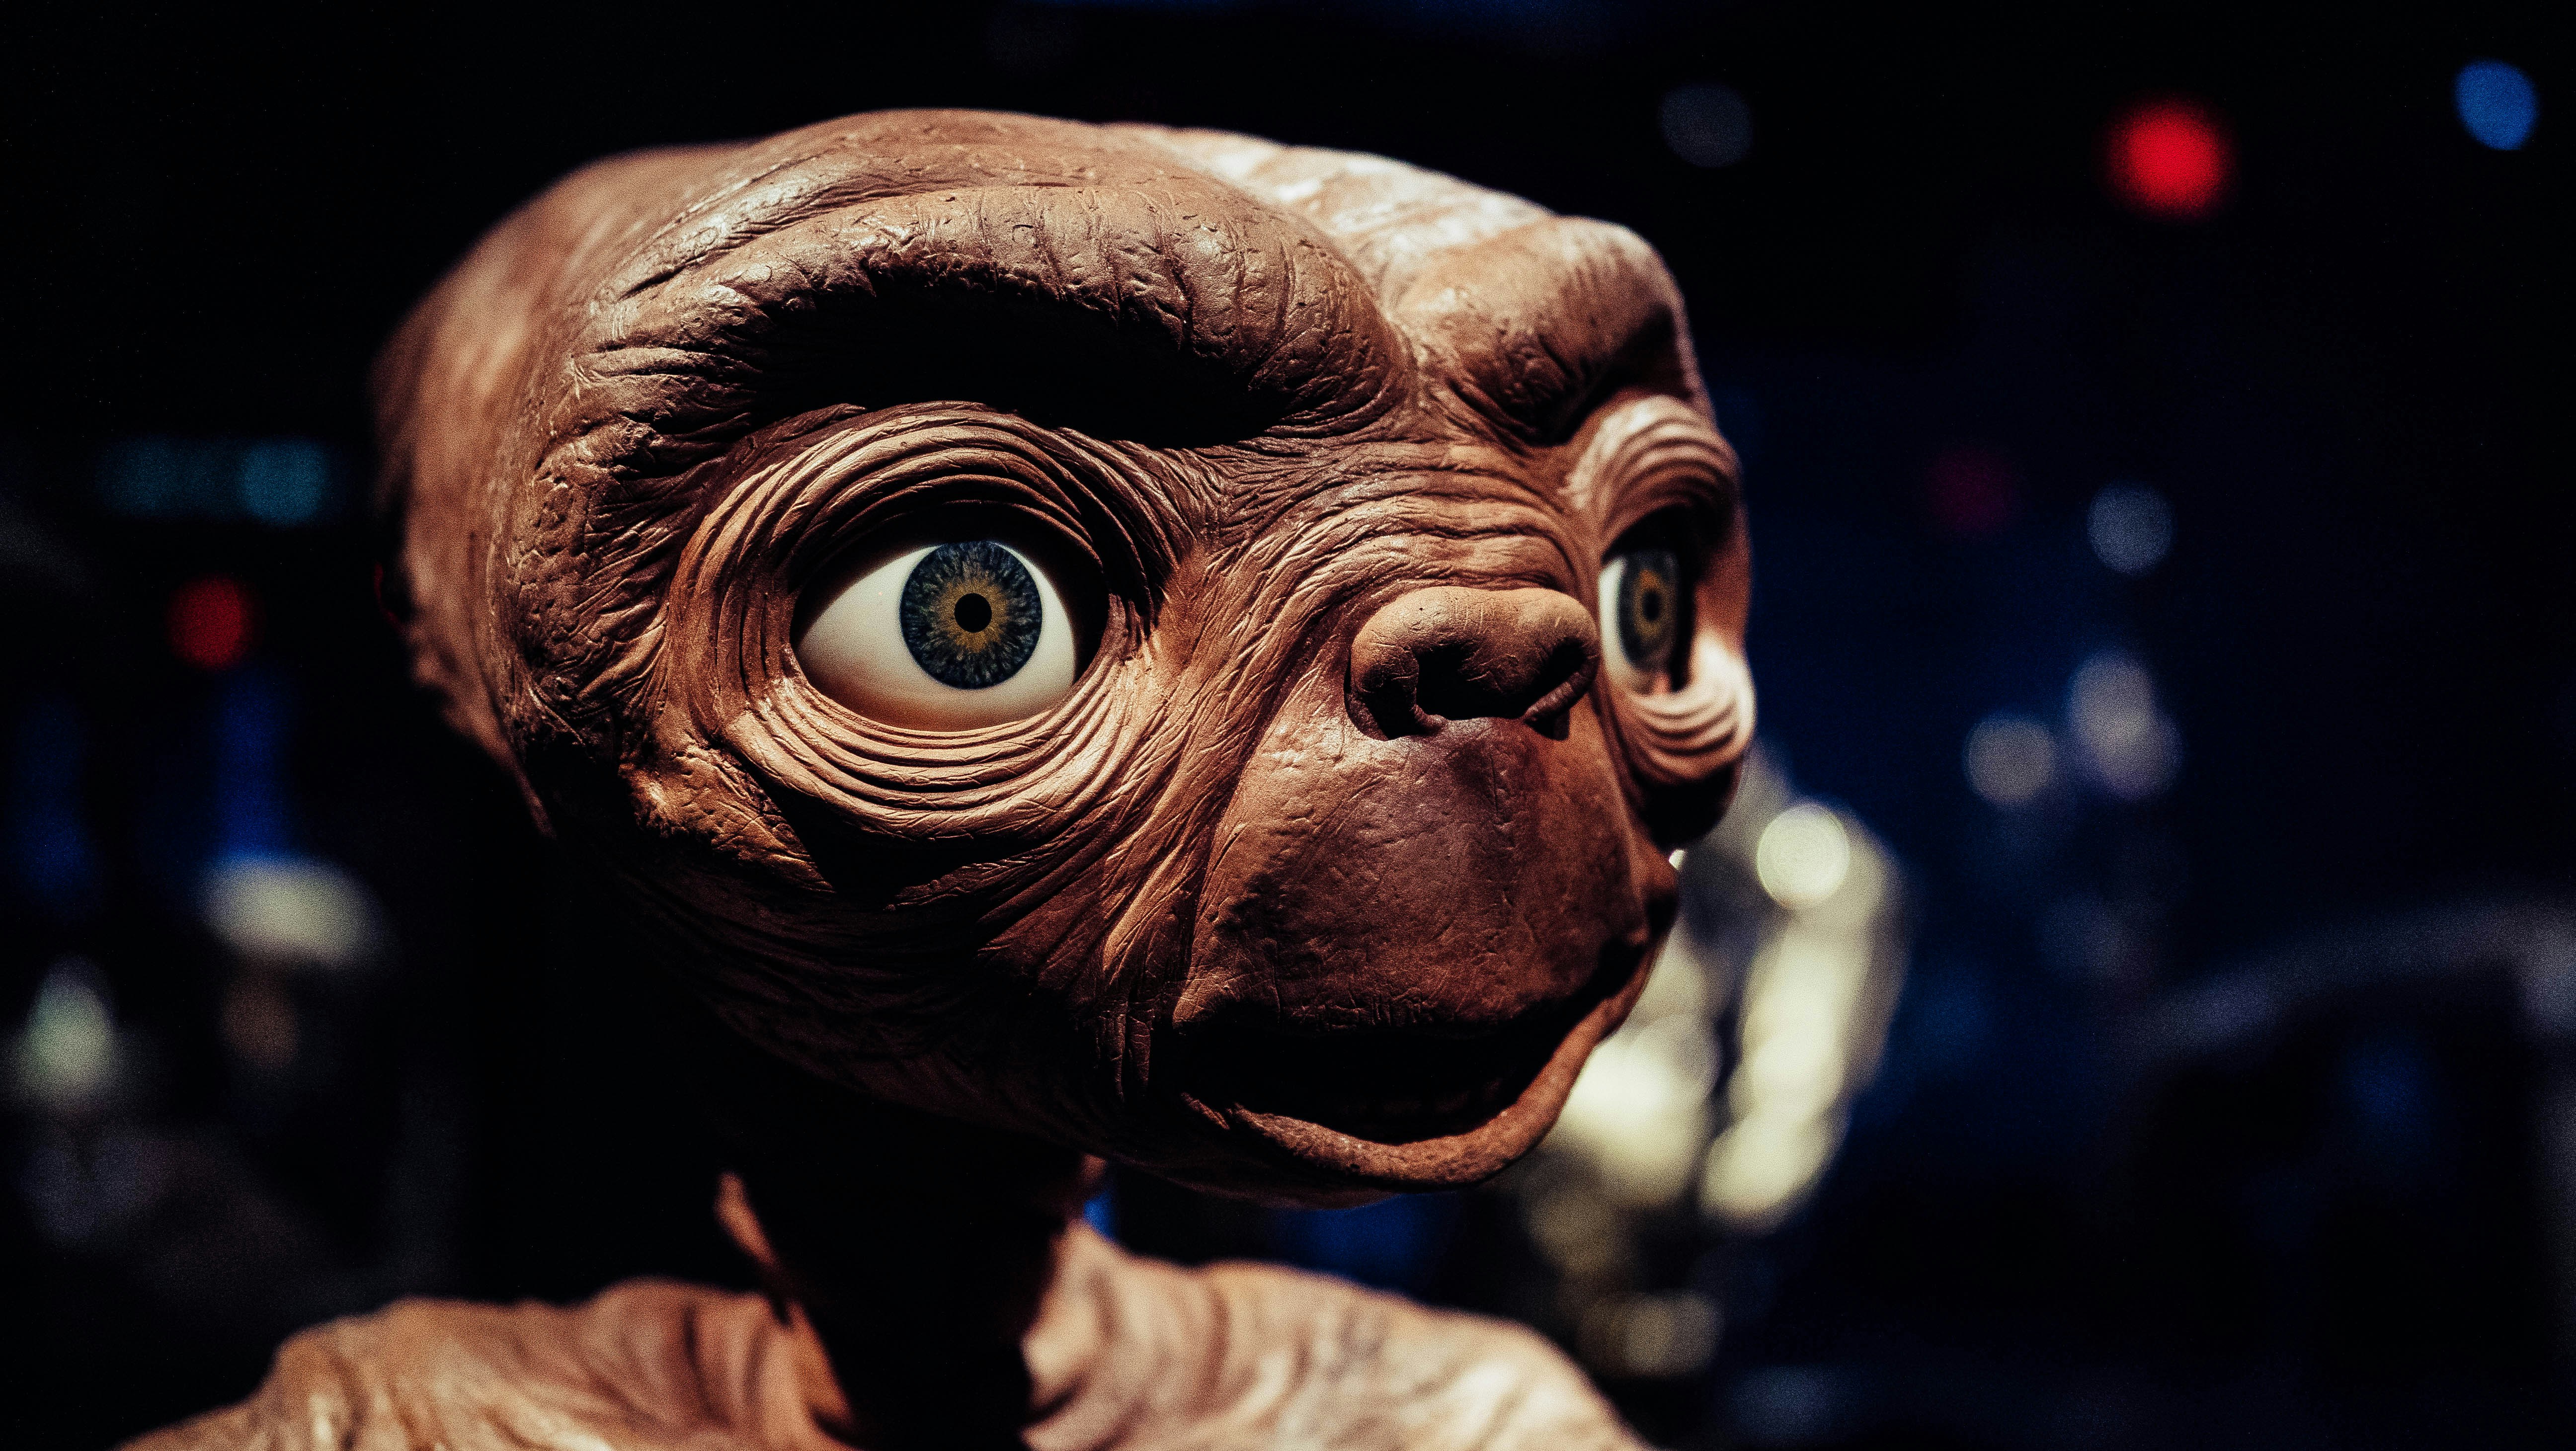 Film prop of ET at the Academy Museum of Motion Pictures in Los Angeles